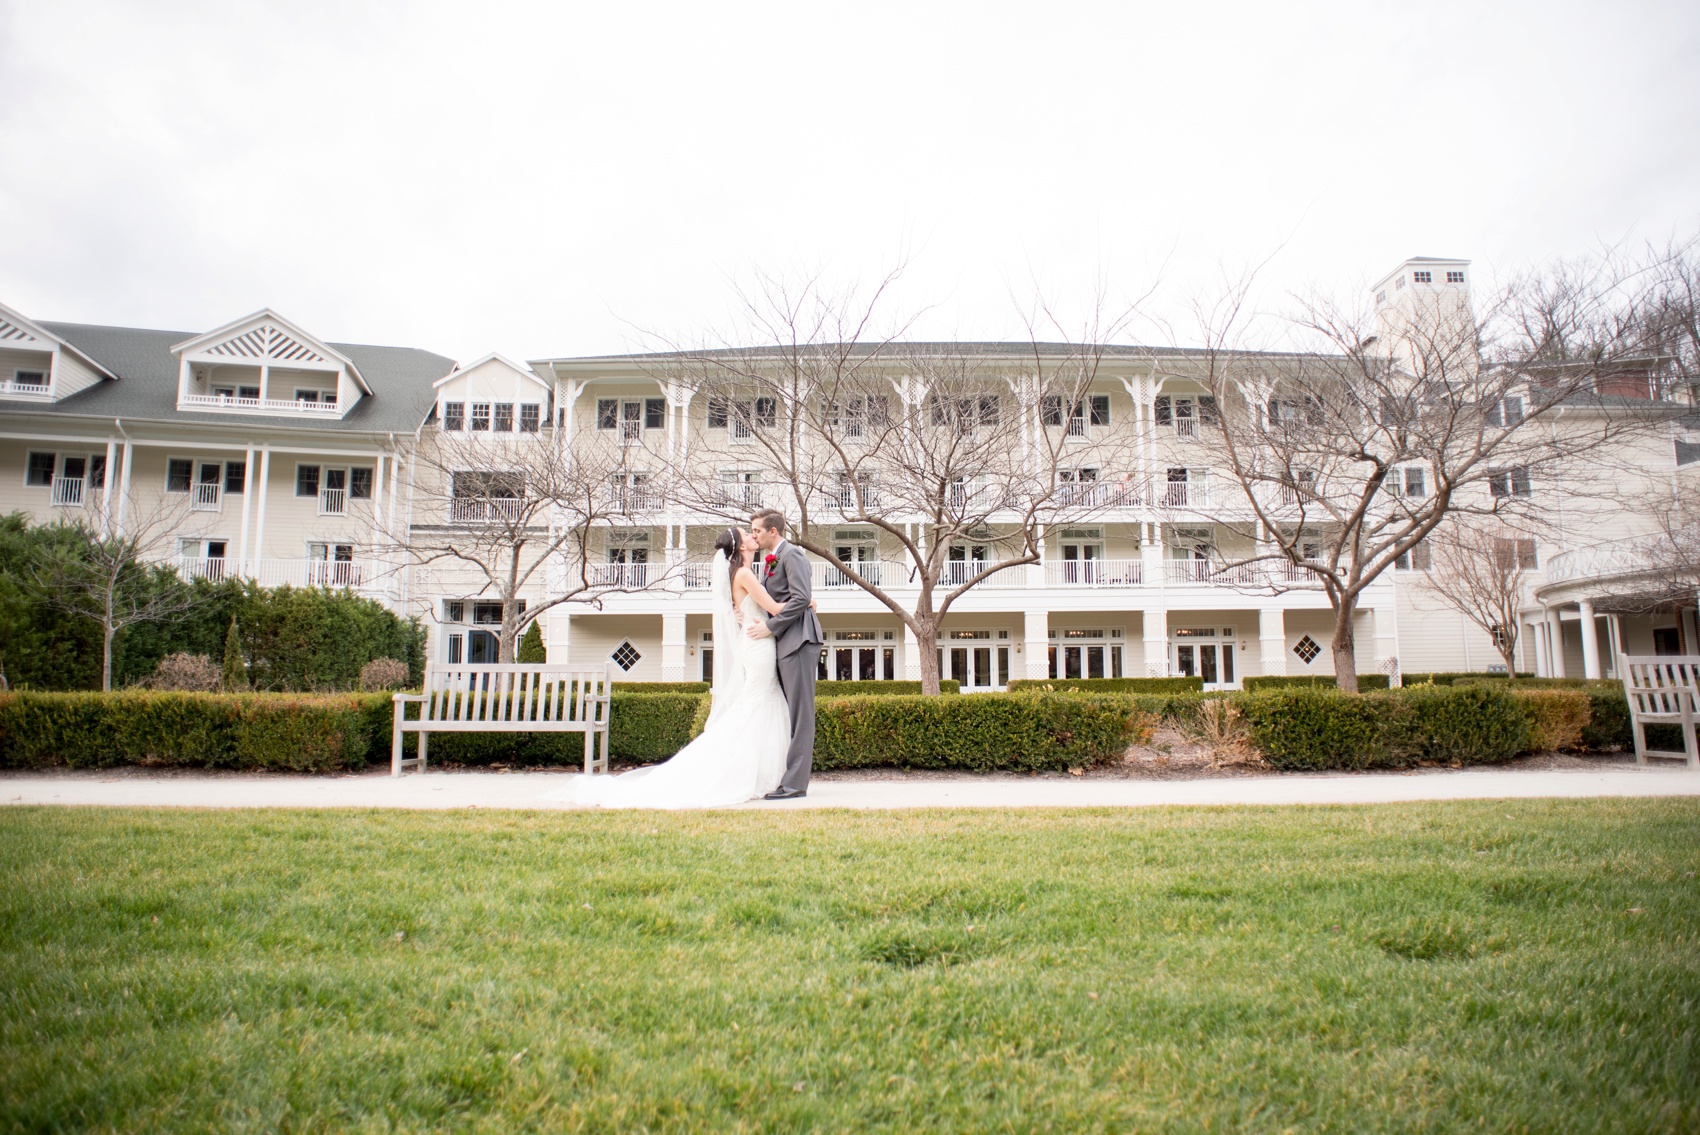 Omni Bedford Springs Resort wedding photos by Mikkel Paige Photography. Christmas holiday winter wonderland day with red and white color palette.